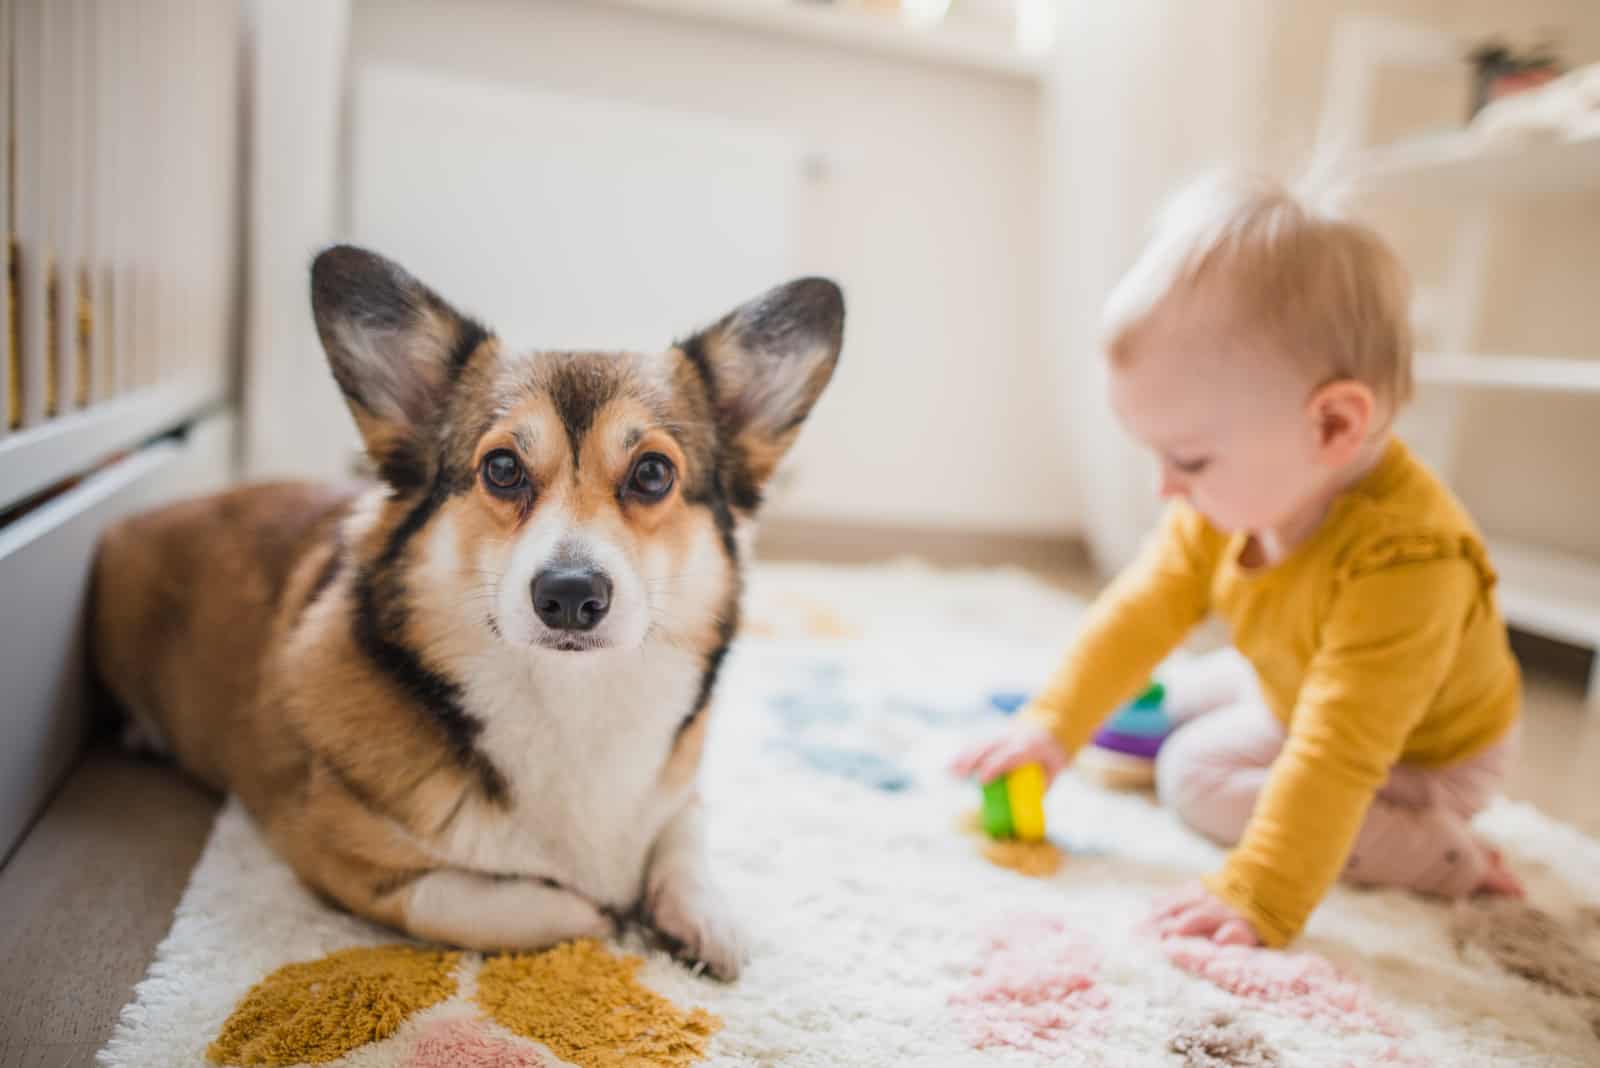 welsh corgi pembroke dog and a baby playing together on the floor of the room